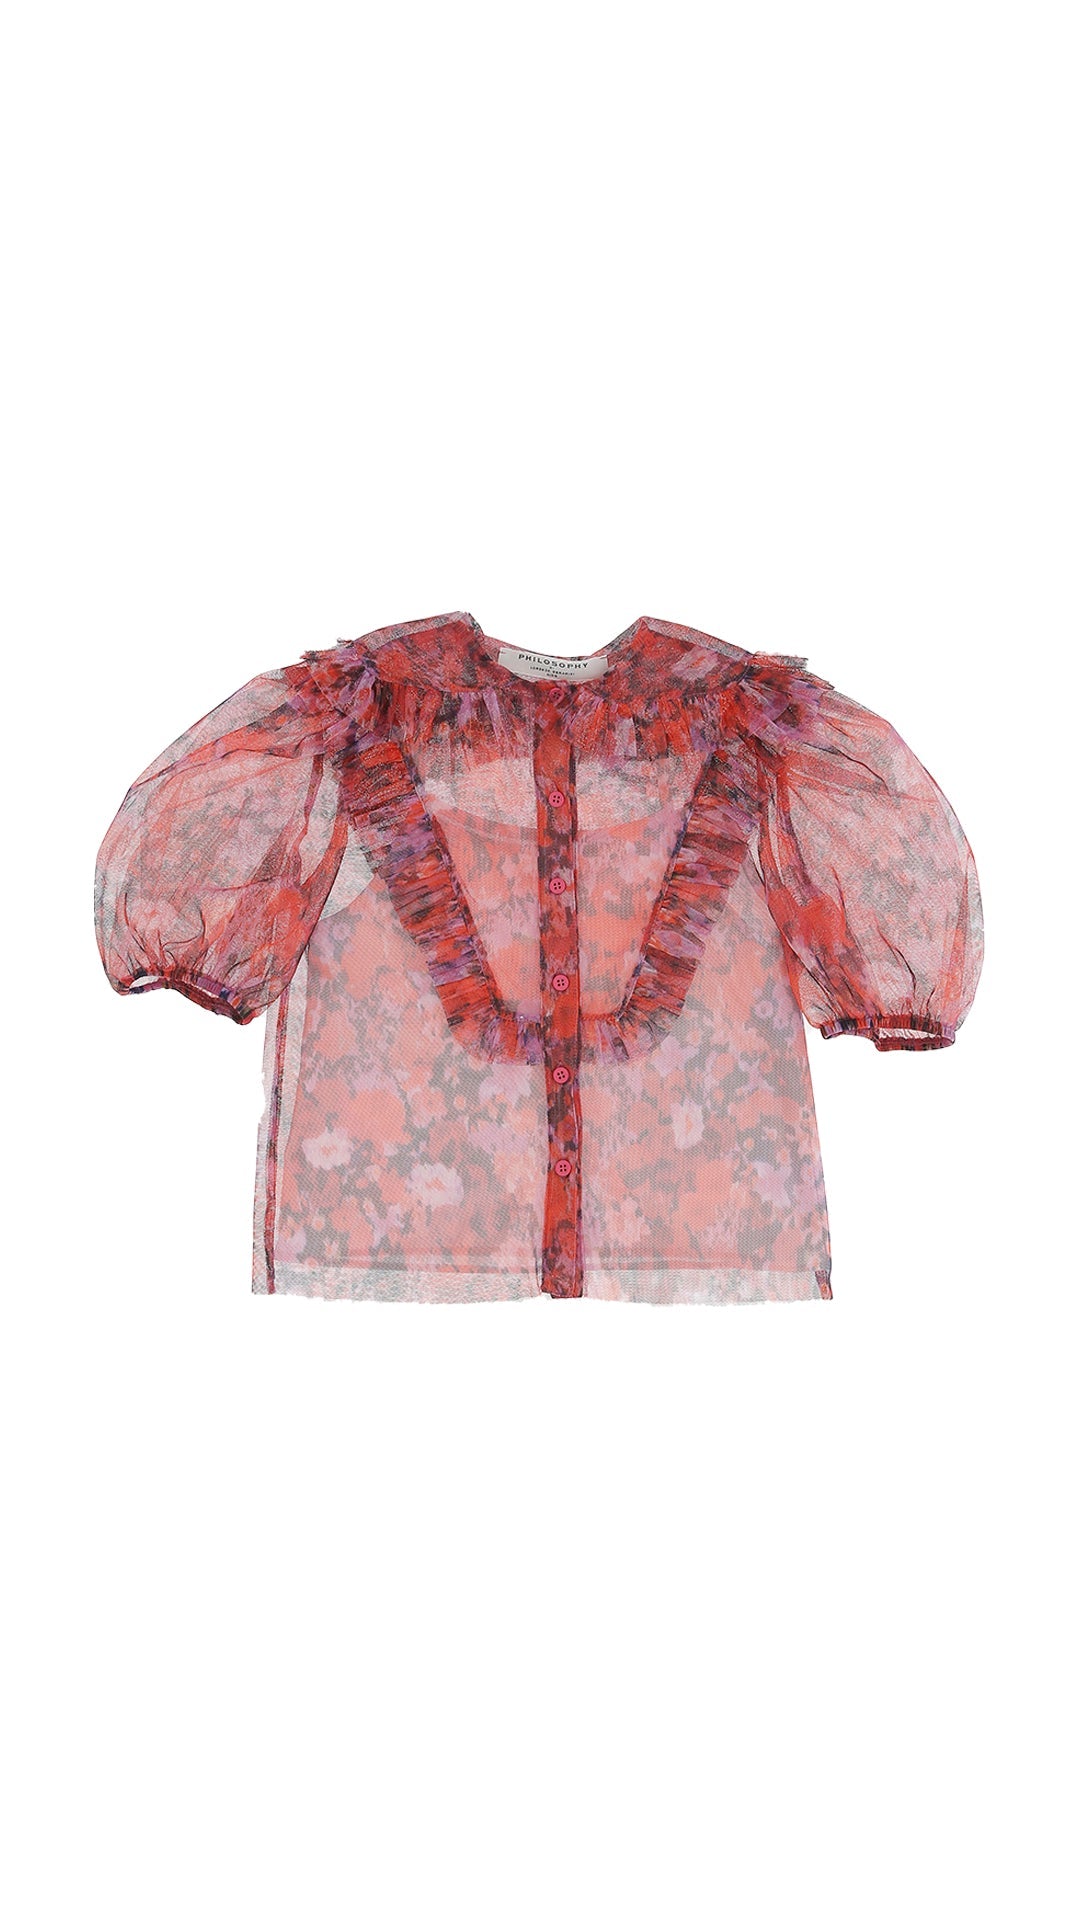 SS All Over Print Top with Ruffles - Multicolor - Posh New York